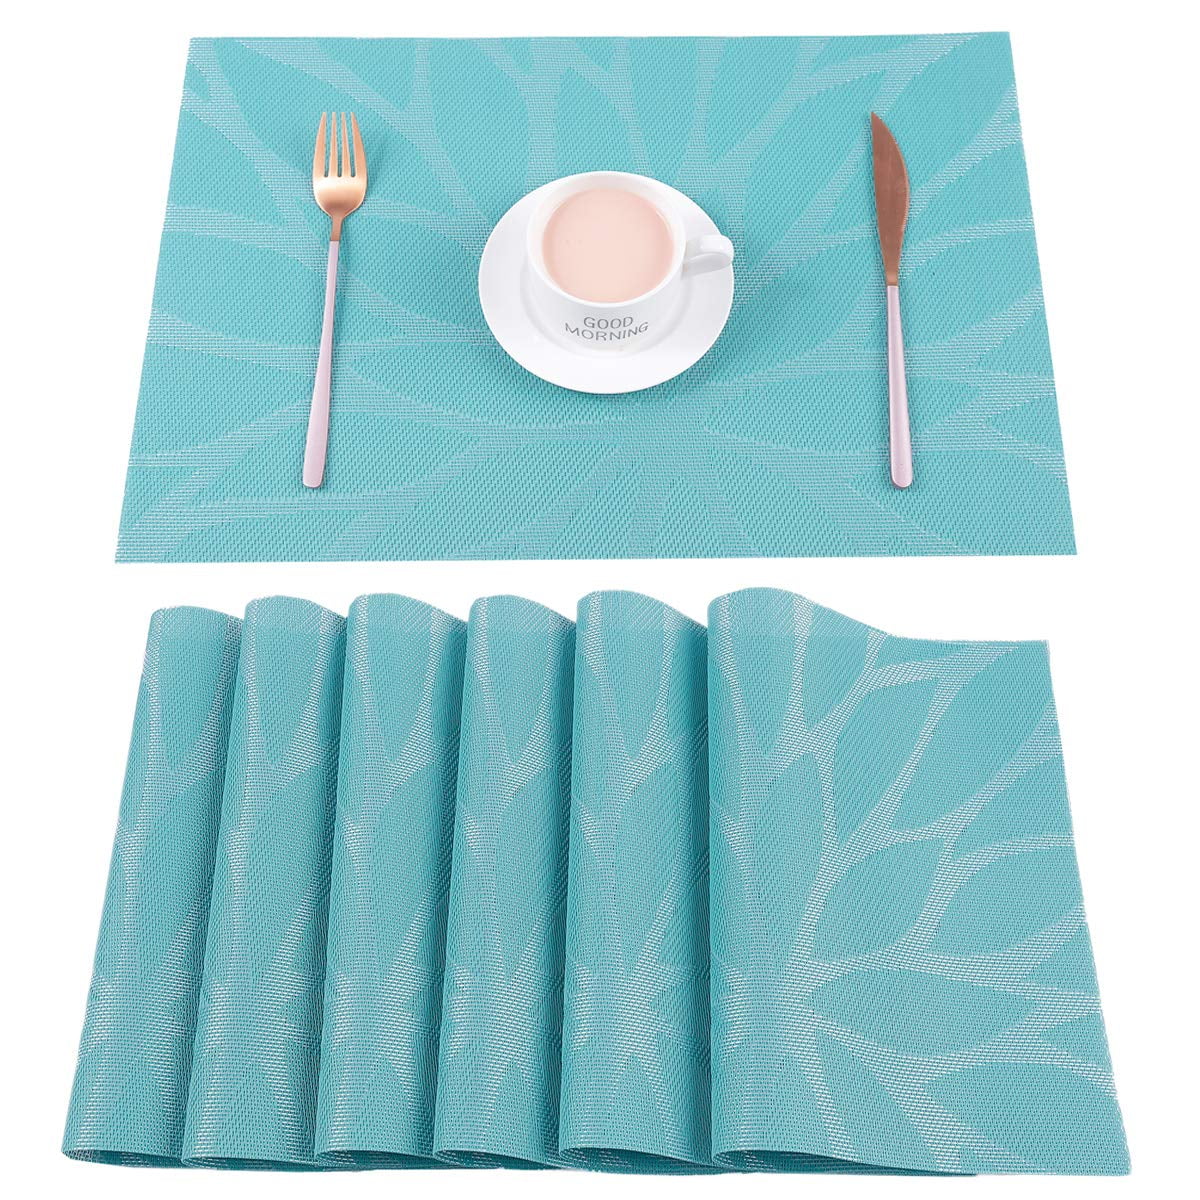 dining table 13x18 inch eco friendly for kitchen table set of 6 Skanthaguru Exports Heat-resistant Placemats Stain Resistant Anti-skid Bamboo Placement mats Christmas Placemats brown and blue